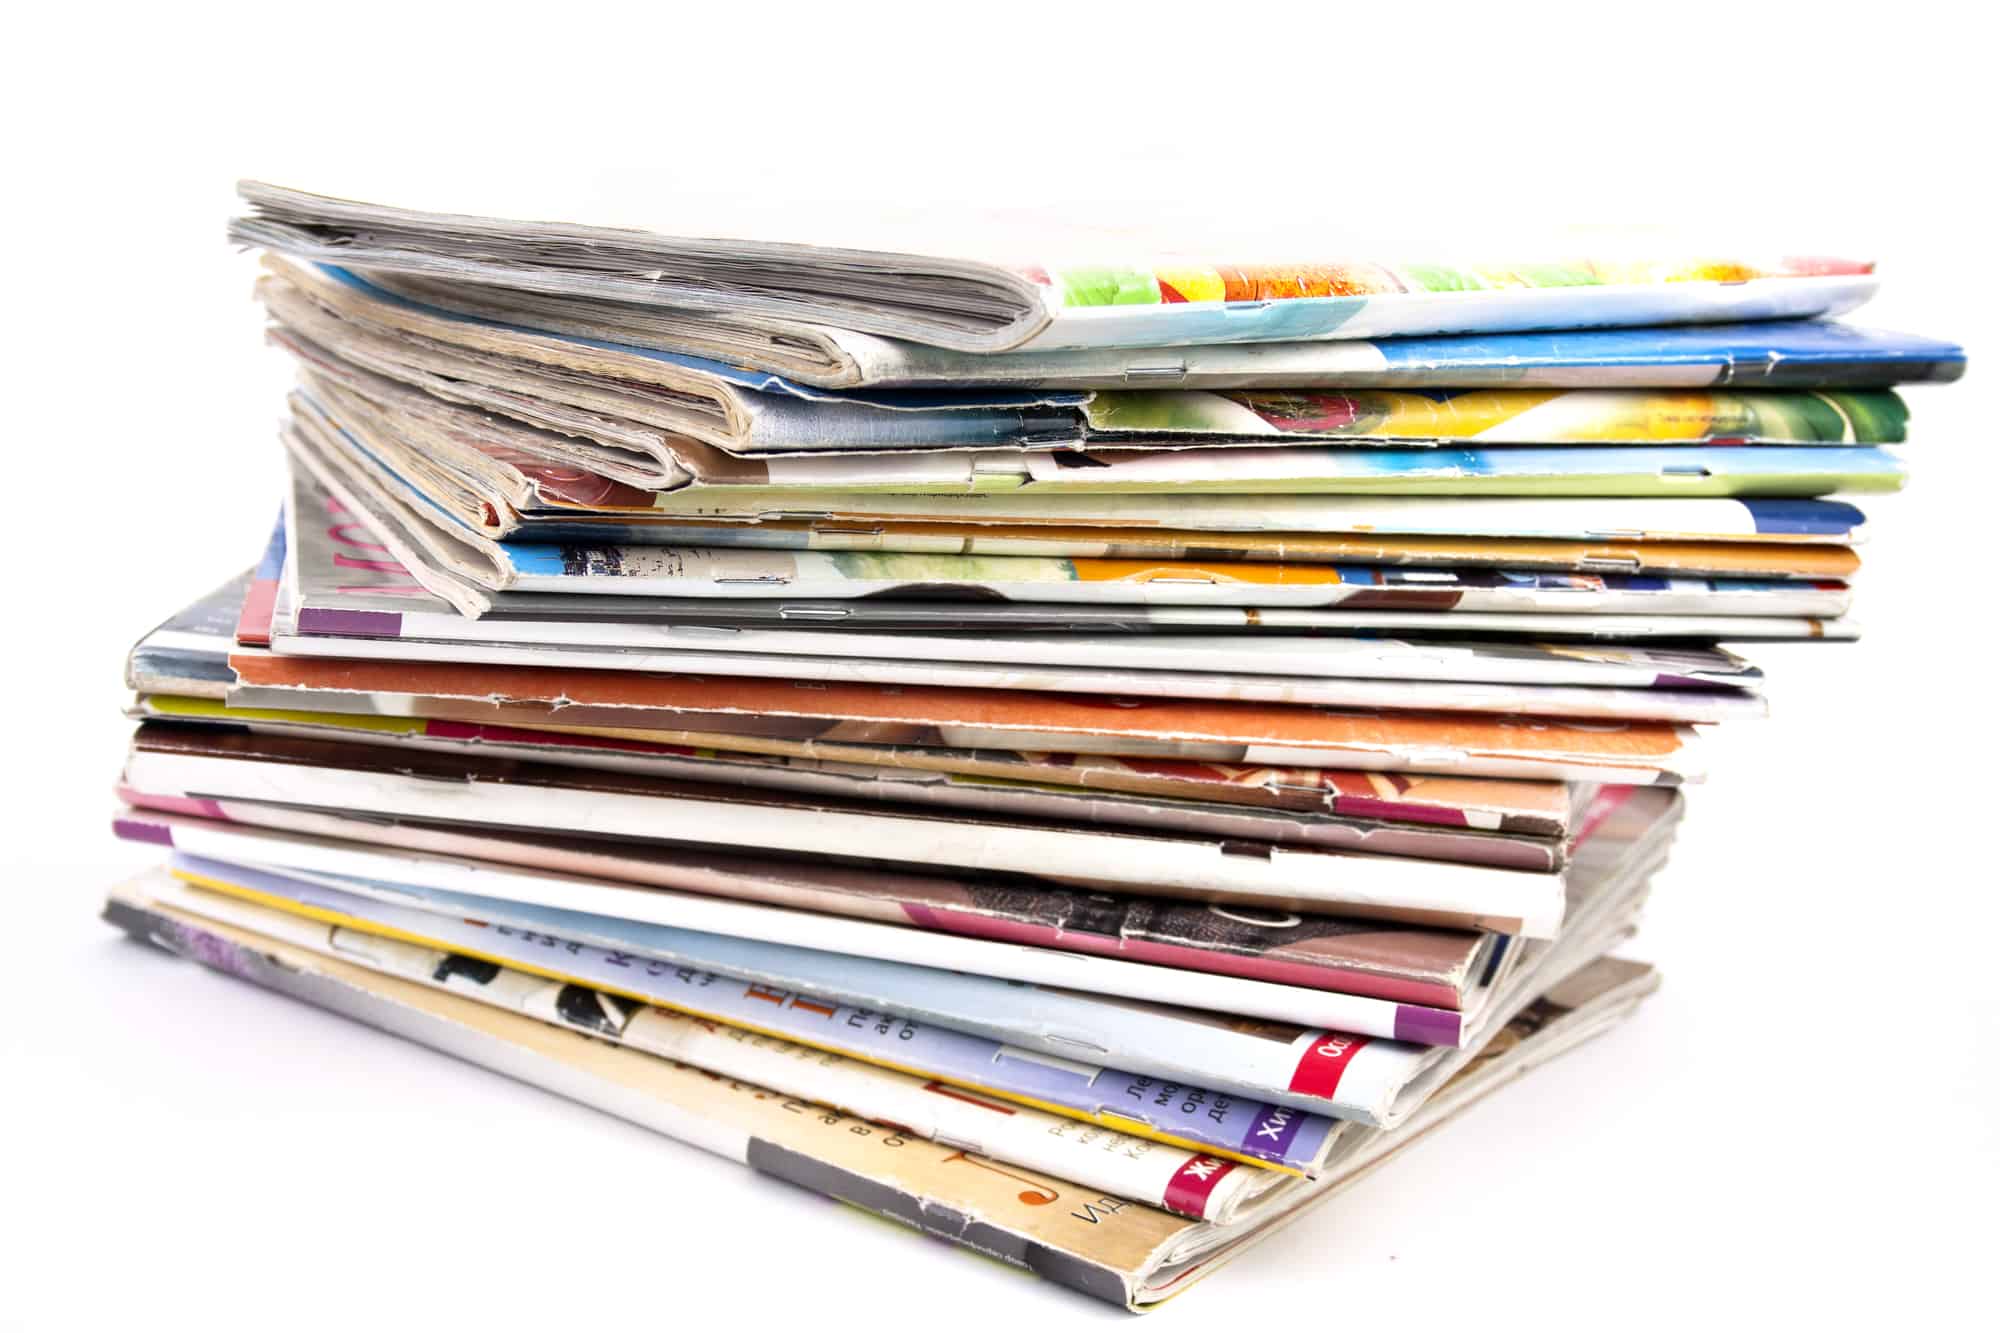 5 Things To Do With Old Magazines - HomeAndGardenThings